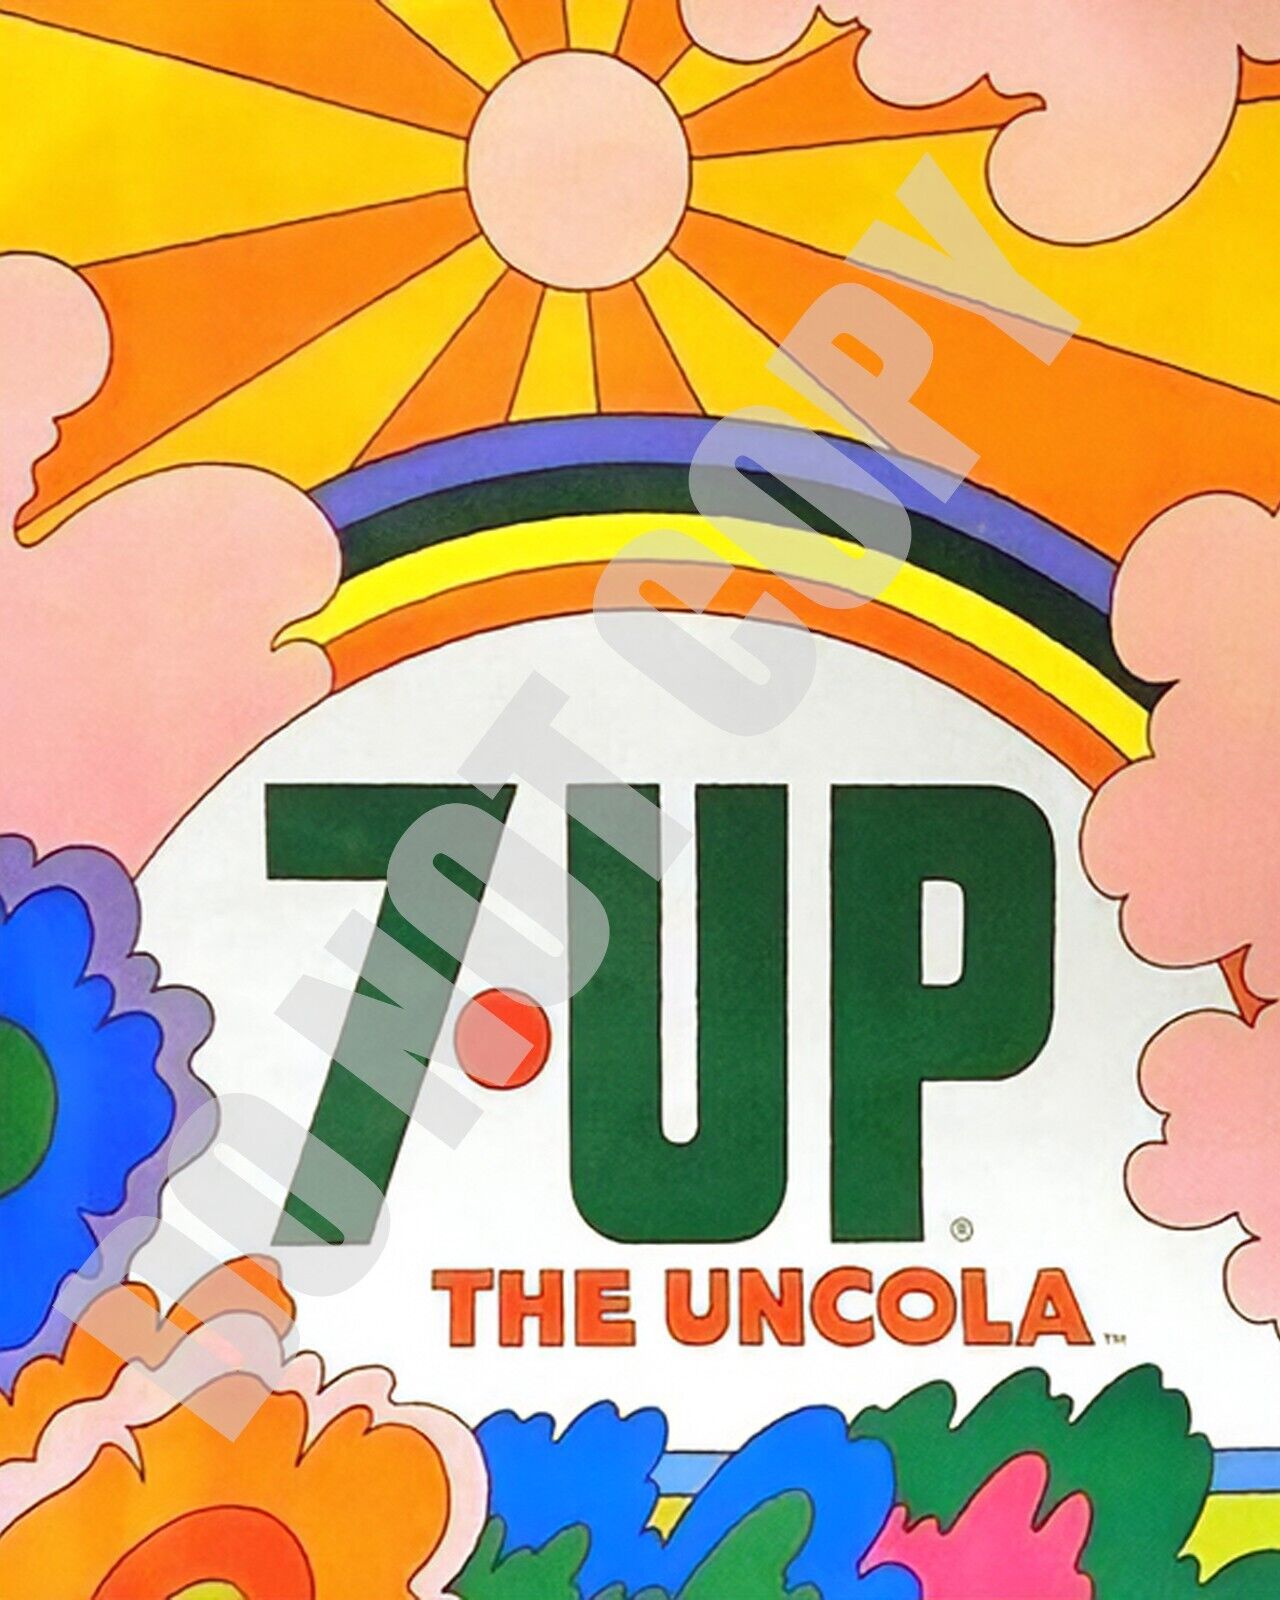 1970s Groovy Cool 7-UP The Uncola Promo Magazine Ad 8x10 Photo